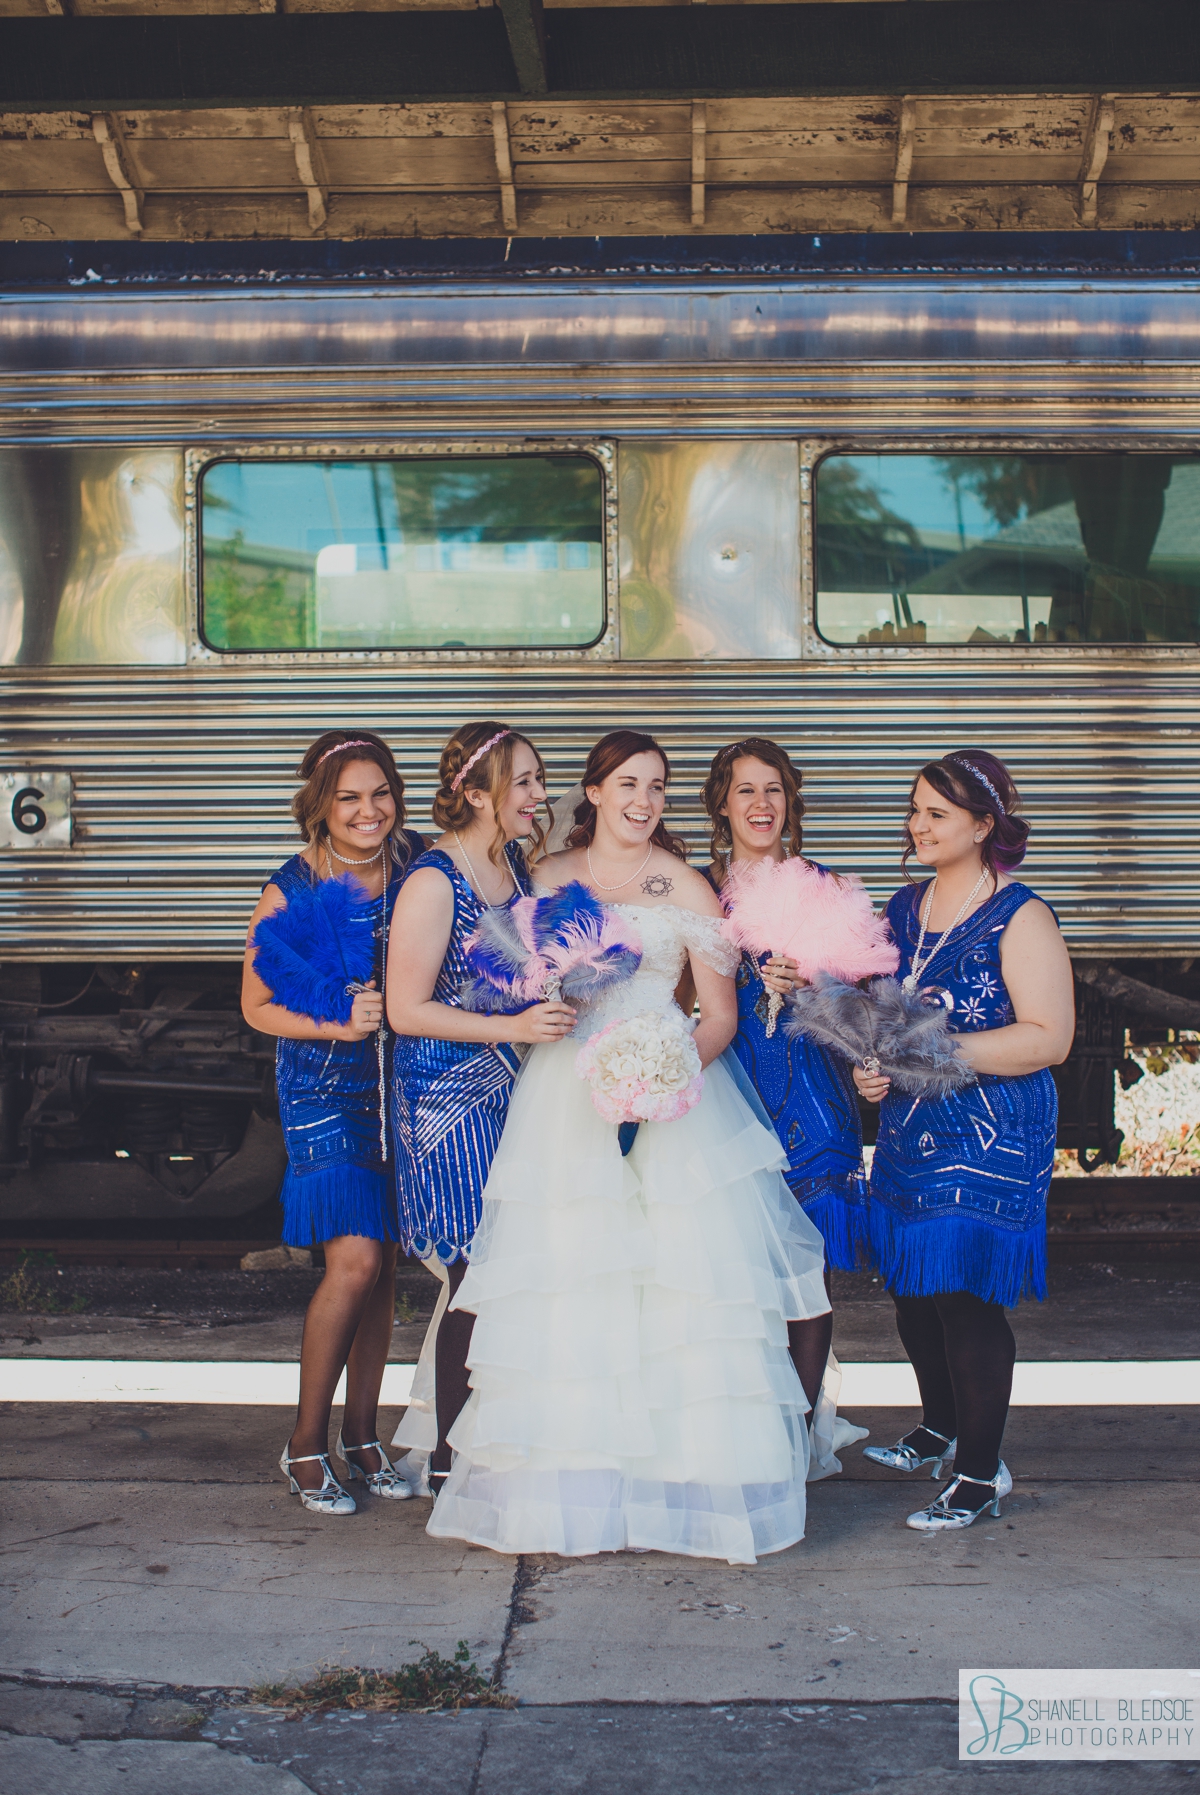 Wedding party on train cars at historic southern railway station